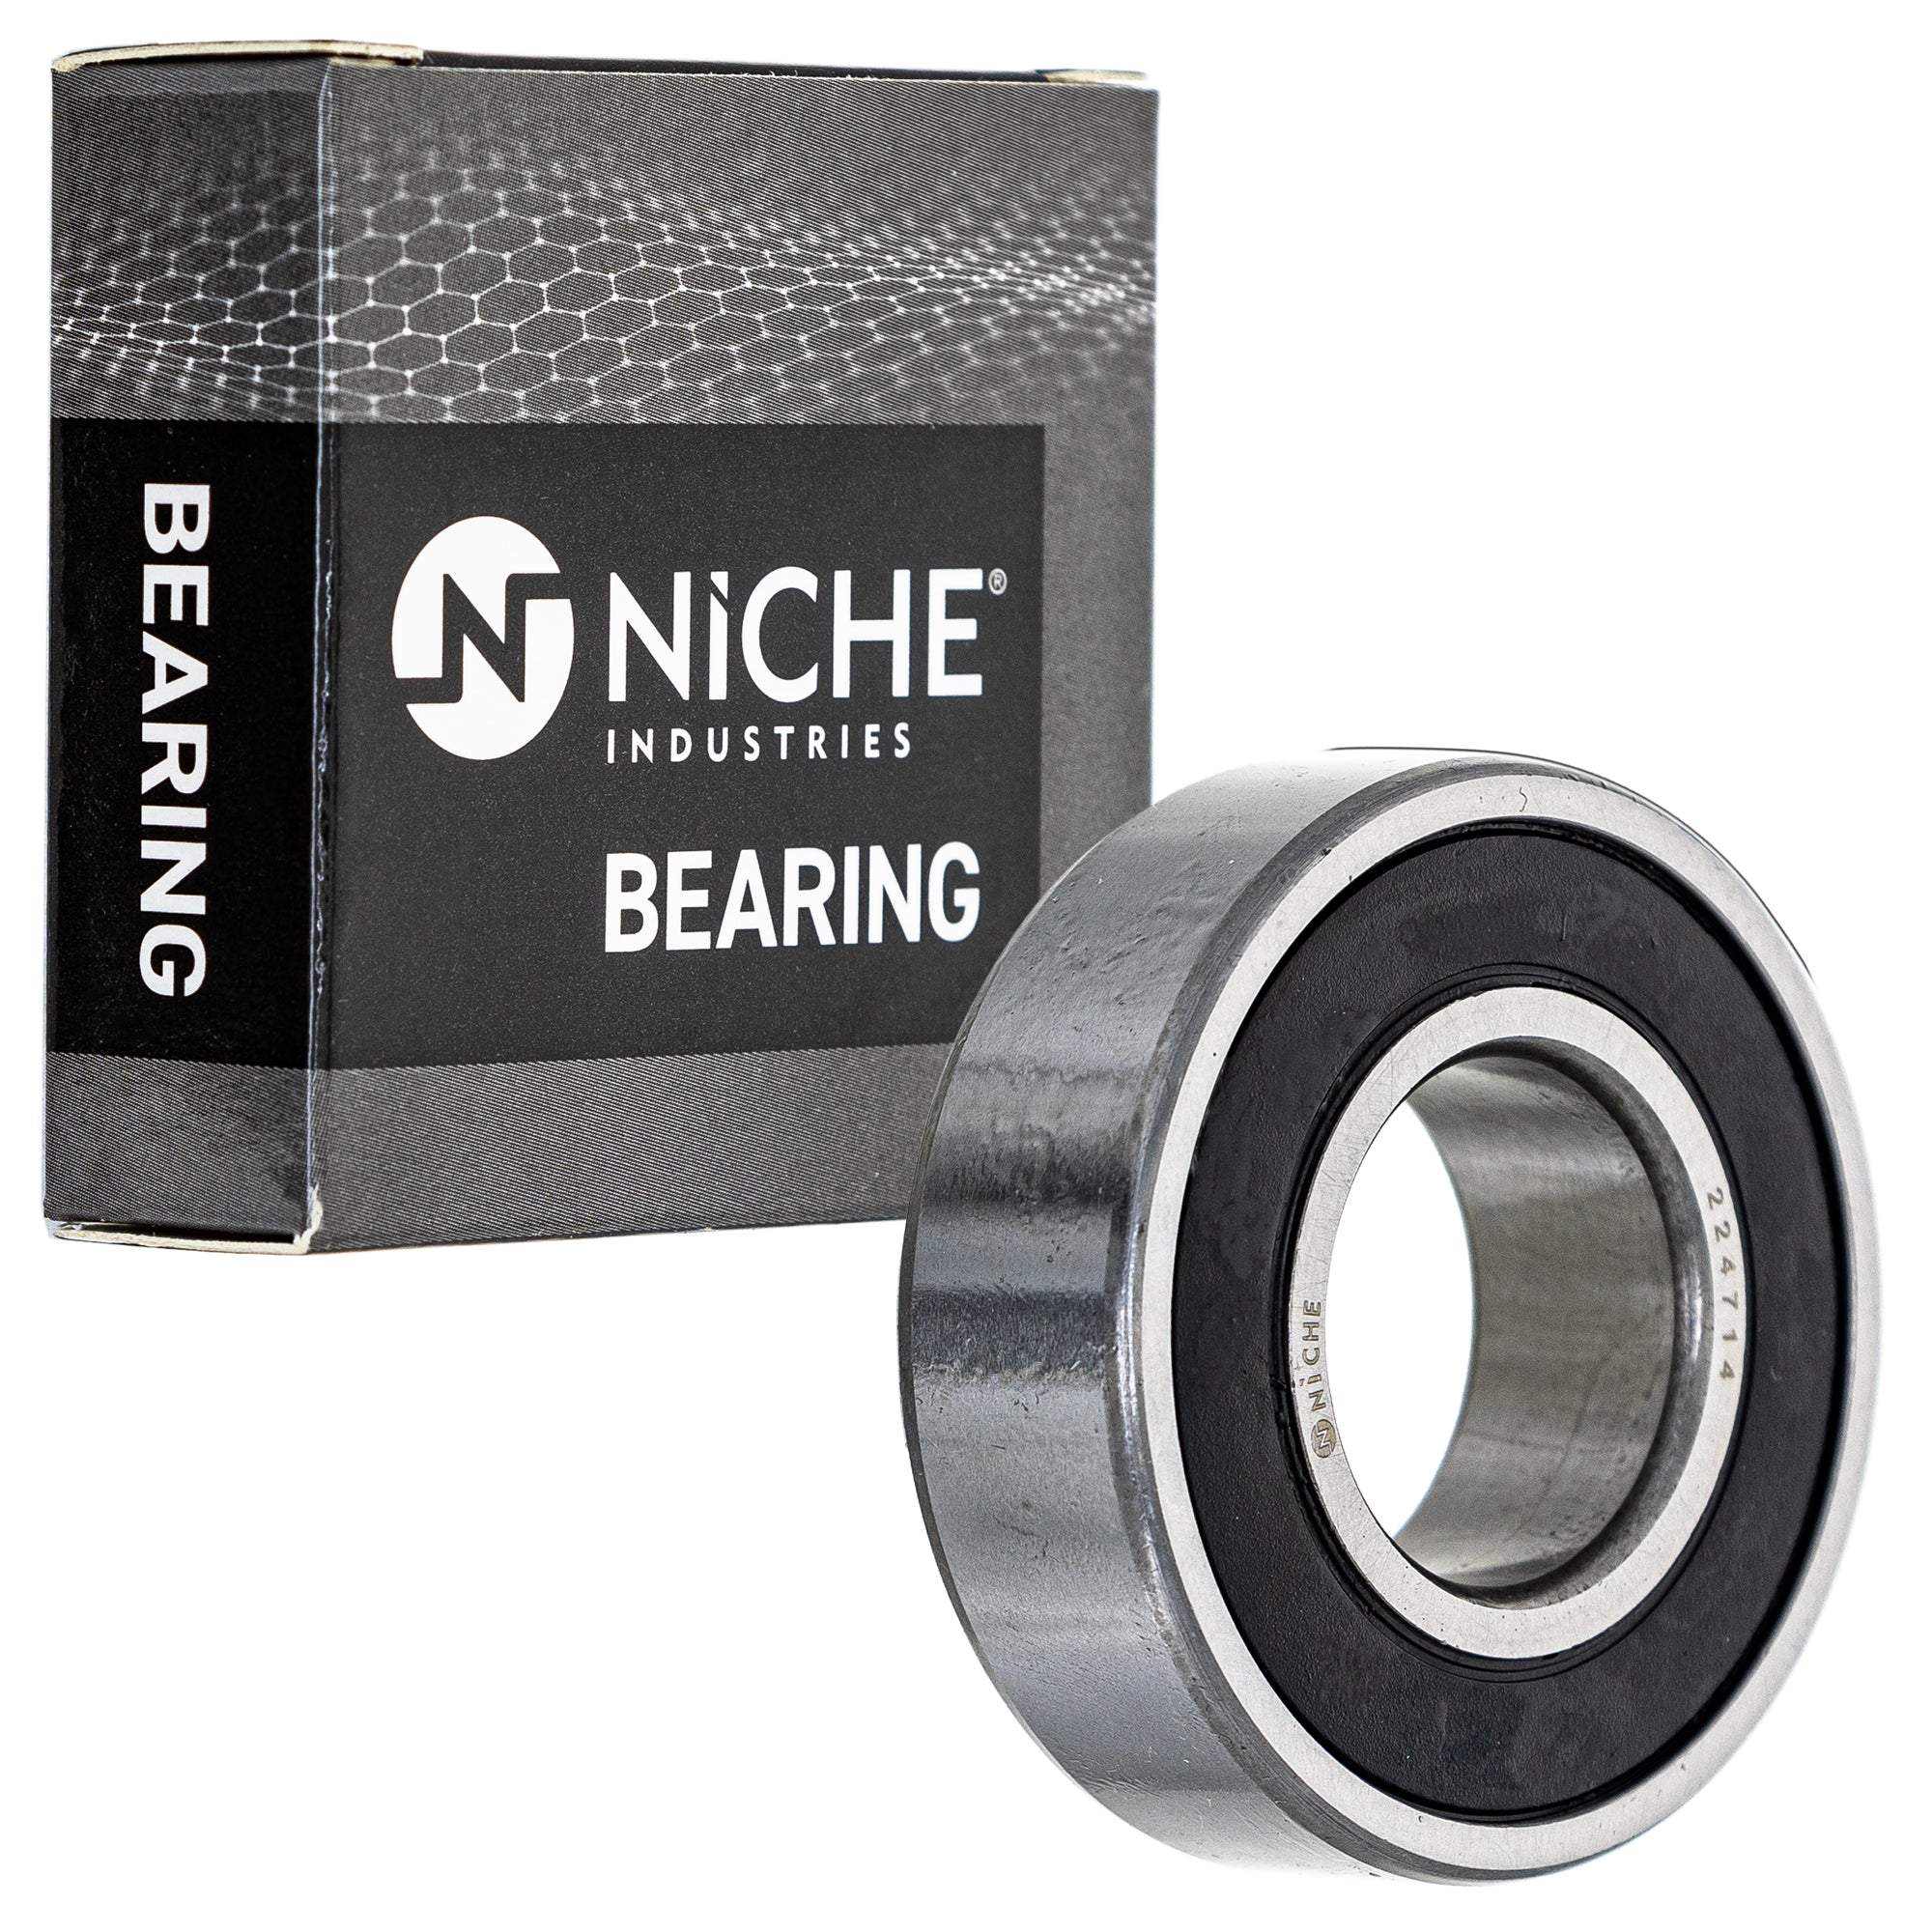 NICHE 519-CBB2217R Bearing 10-Pack for zOTHER Silver RVT1000R Foreman